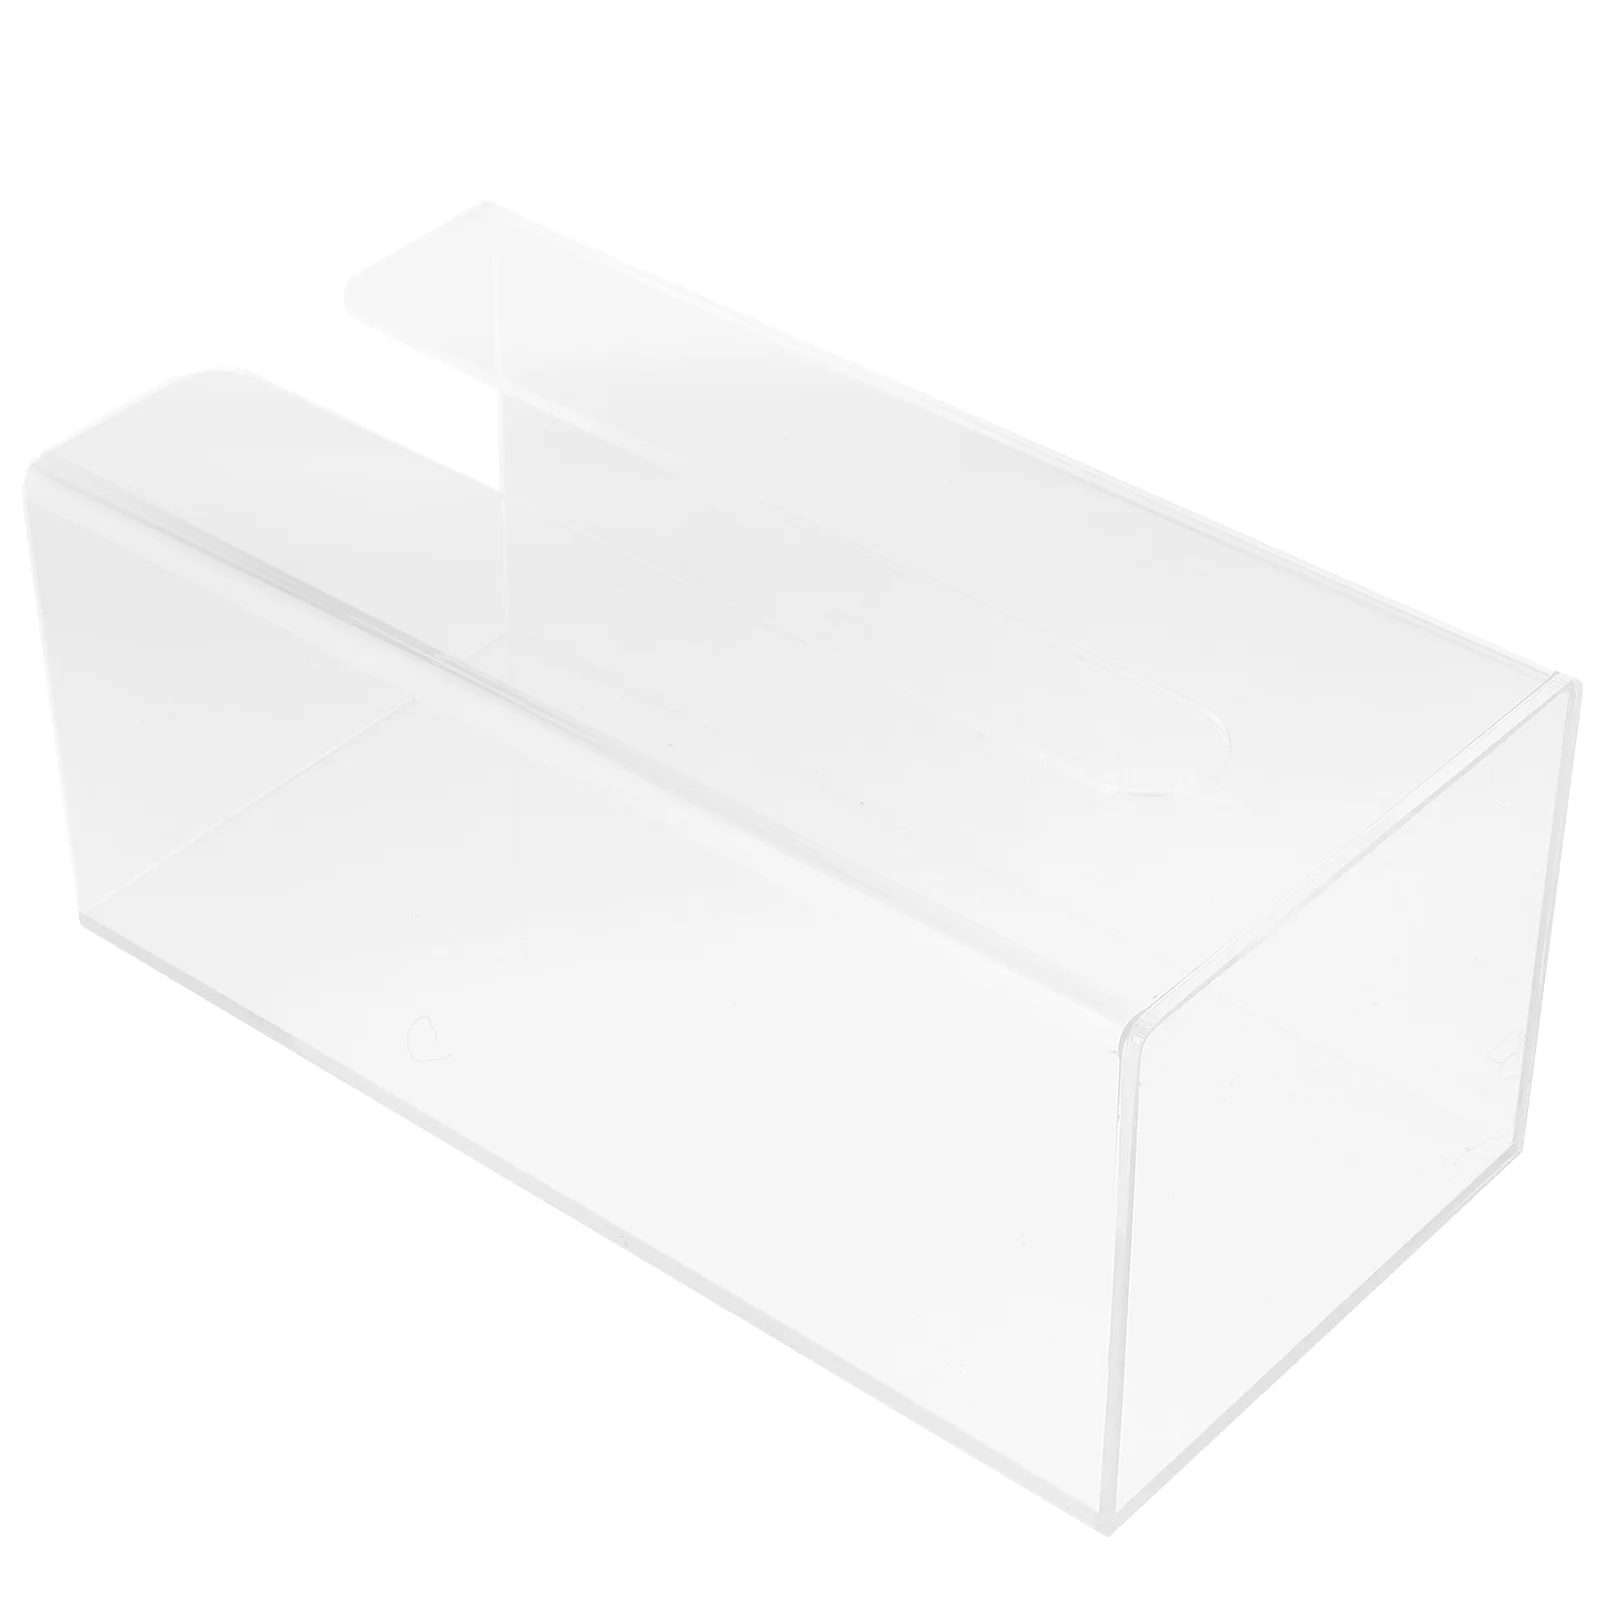 

Napkin Holder Napkins Holders For Paper Tables Tissue Dispenser Cloth Acrylic Clear